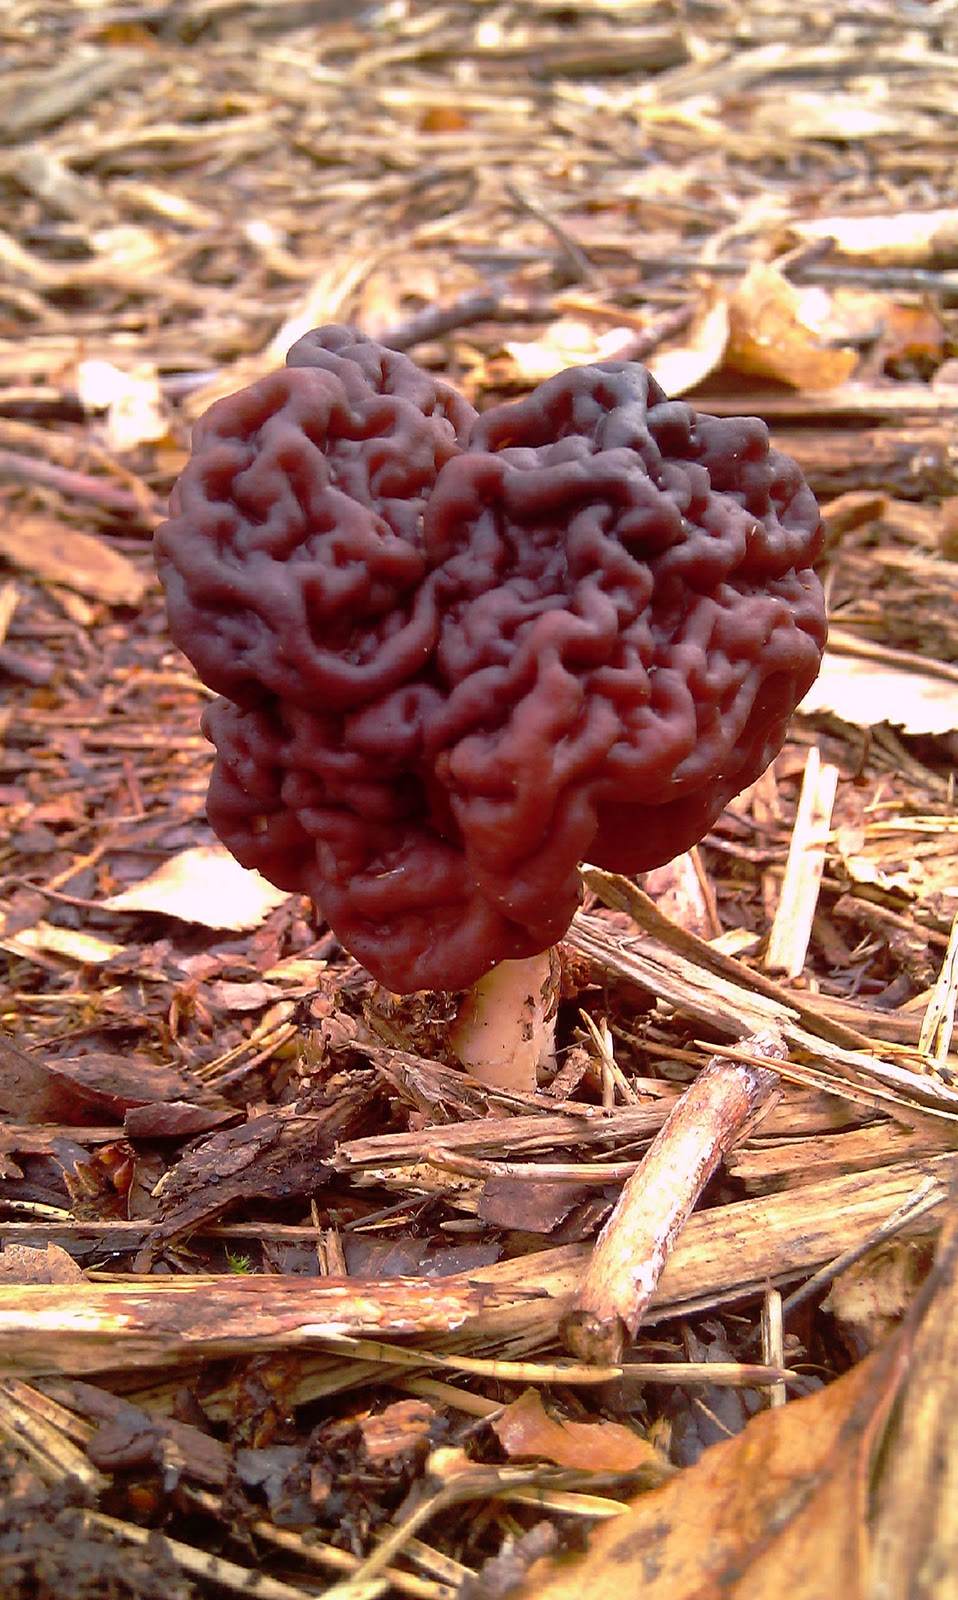 Beauty in small things: The deadly false morel mushroom
